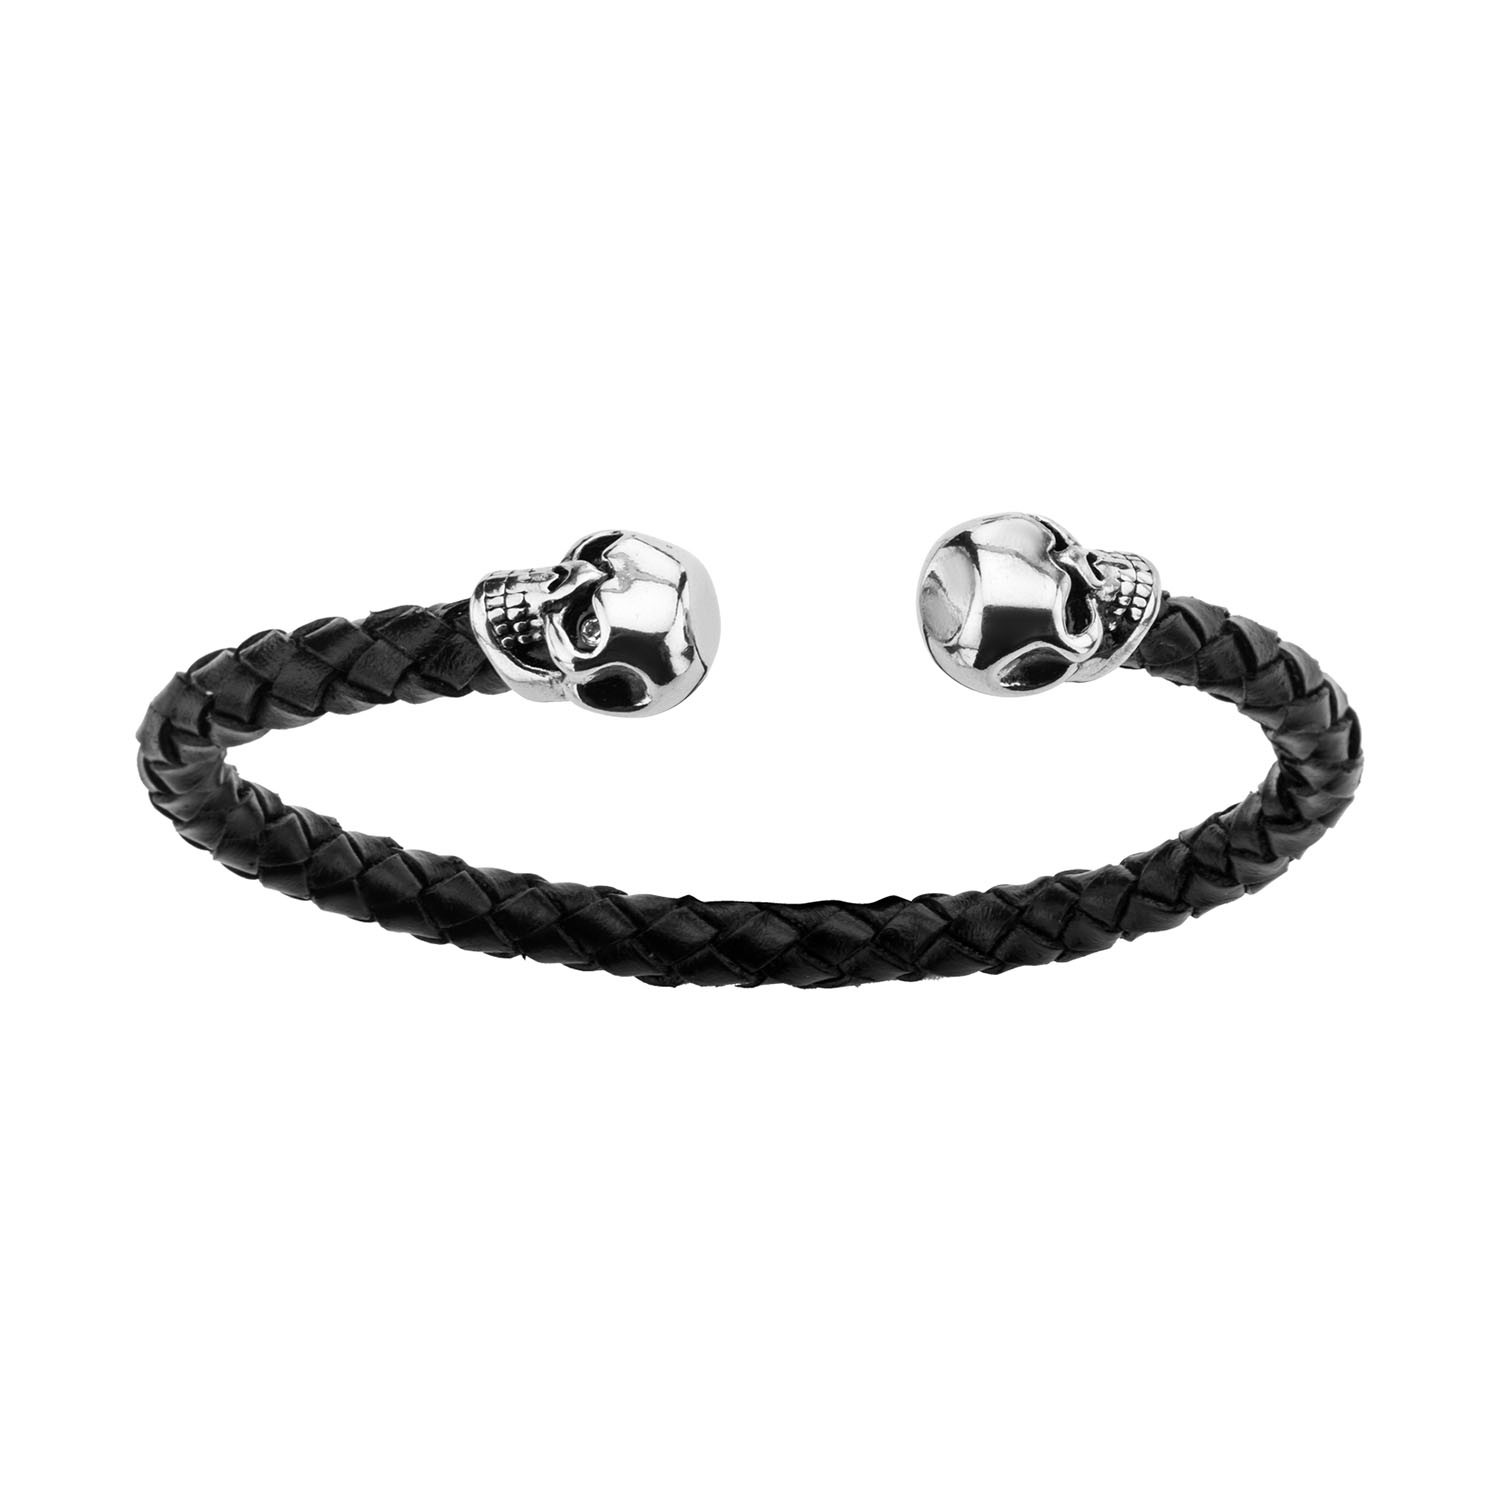 Braided Leather + Skull Ends Cuff Bracelet // Black - Inox - Touch of ...